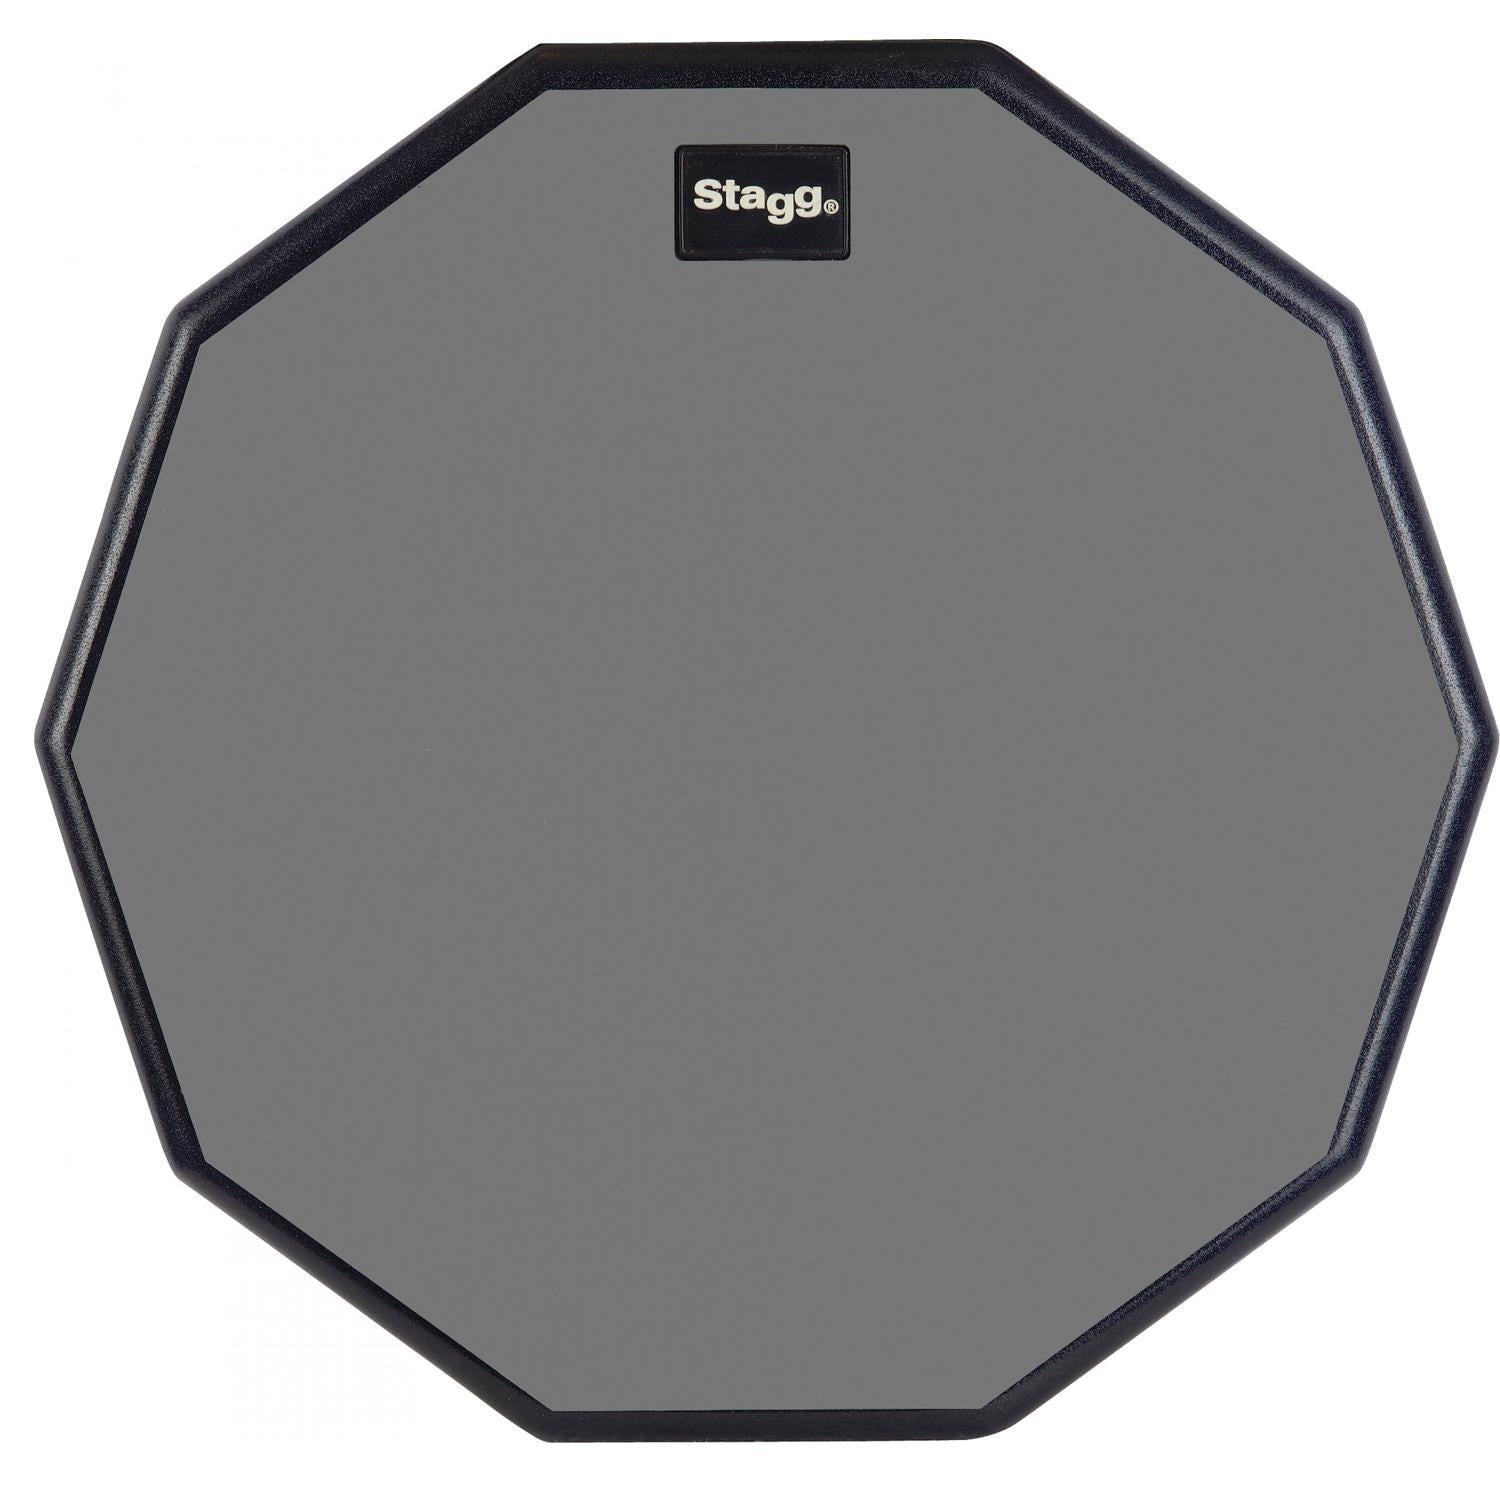 Stagg TD-12R 12" Practice Drum Pad - DY Pro Audio